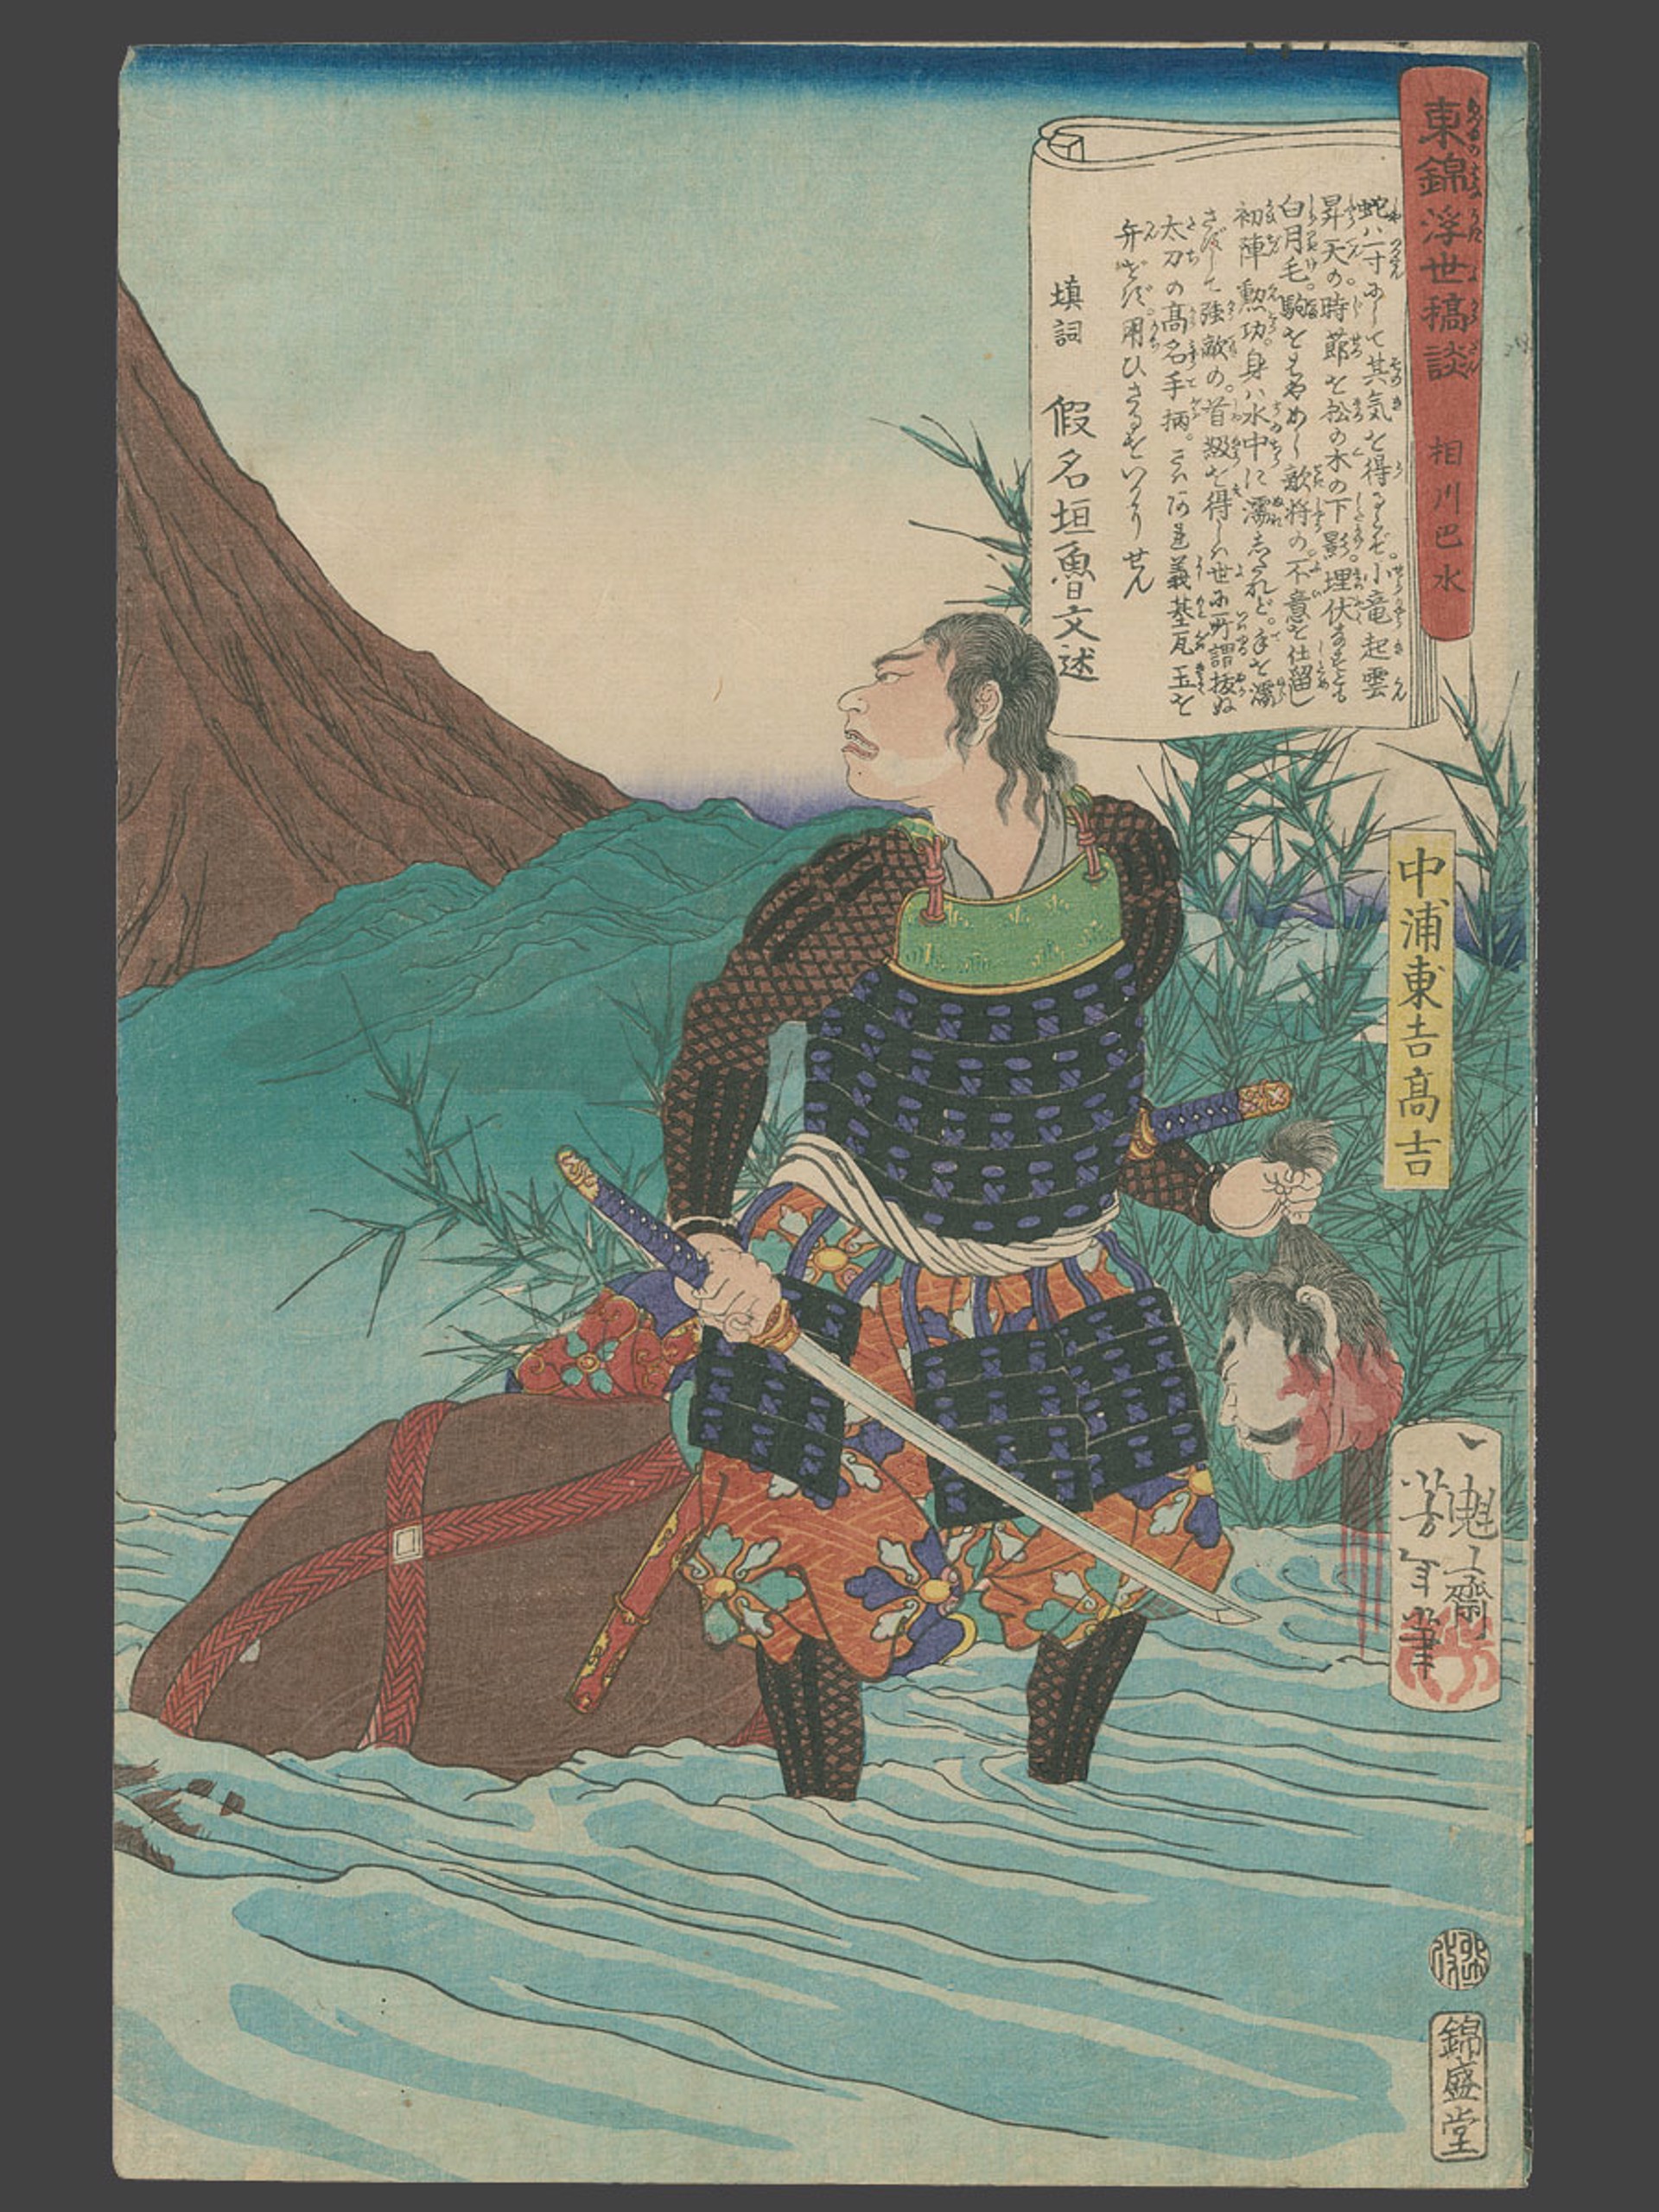 #43 Nakaura Kokichi Takayoshi standing in a River Holding a Severed Head Tales of the Floating World on Eastern Brocade by Yoshitoshi